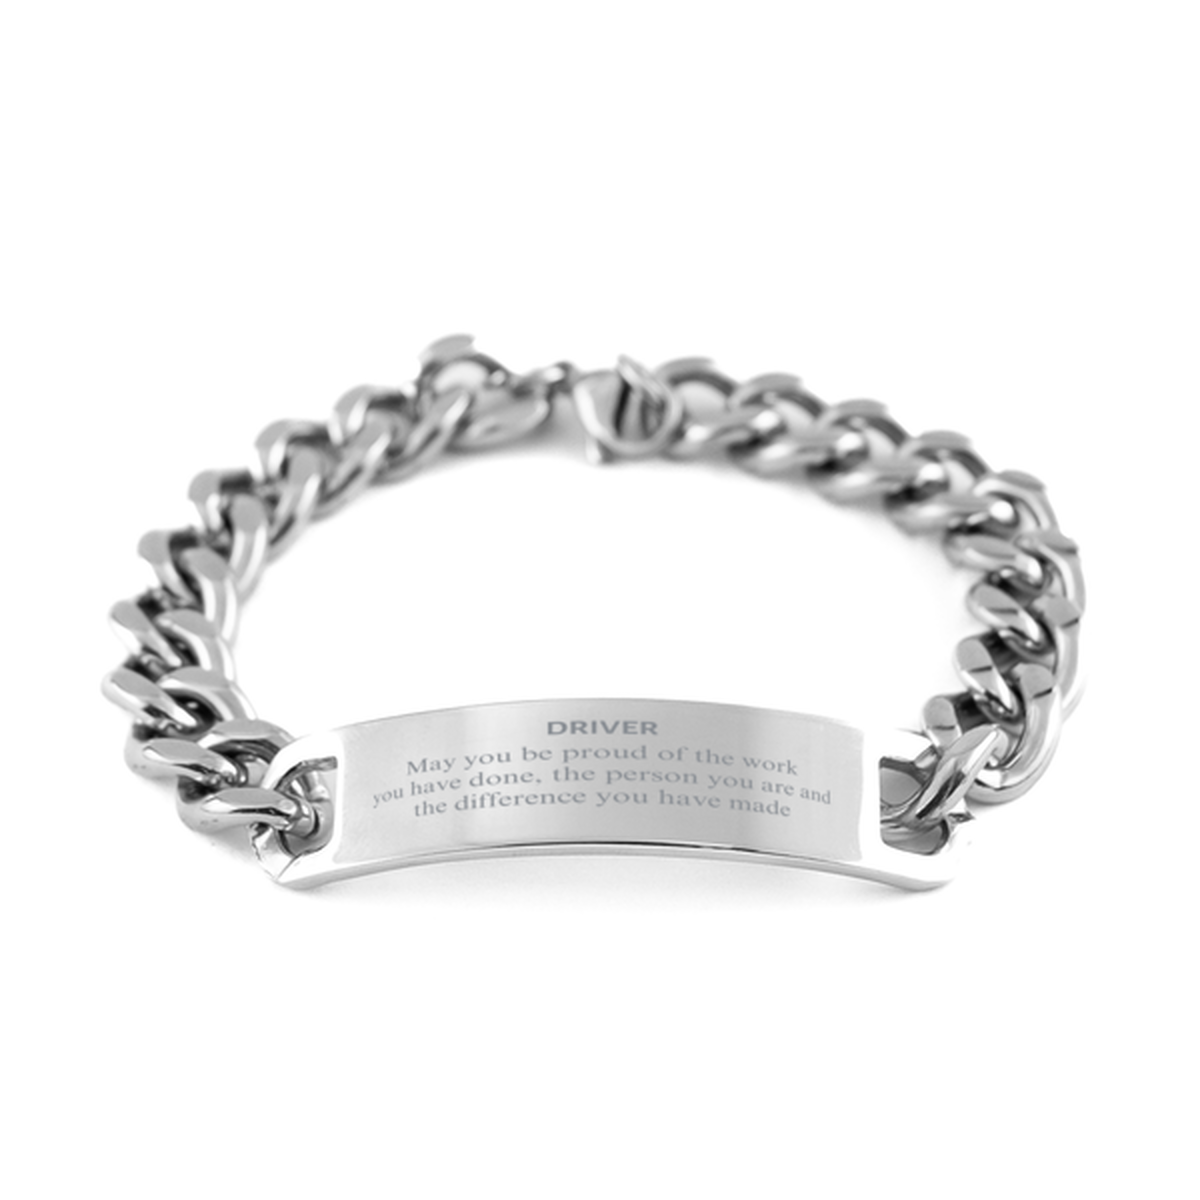 Driver May you be proud of the work you have done, Retirement Driver Cuban Chain Stainless Steel Bracelet for Colleague Appreciation Gifts Amazing for Driver